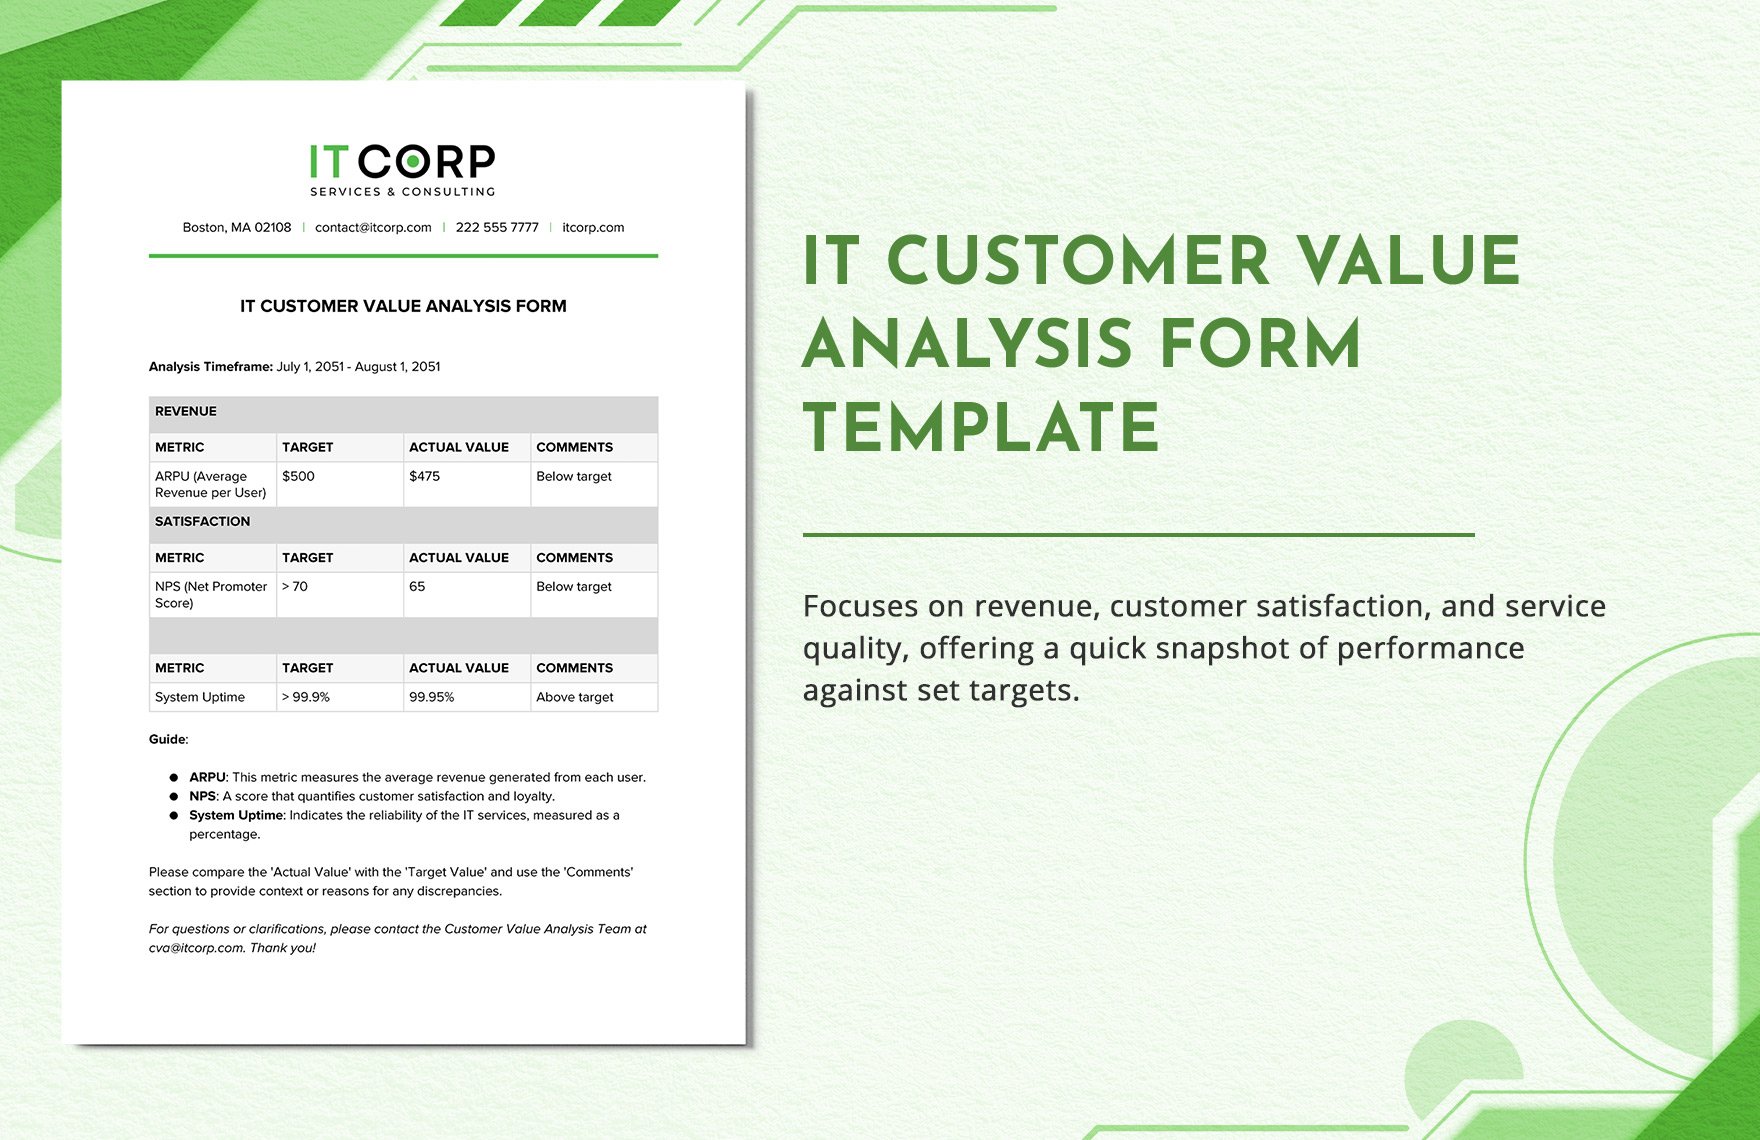 IT Customer Value Analysis Form Template